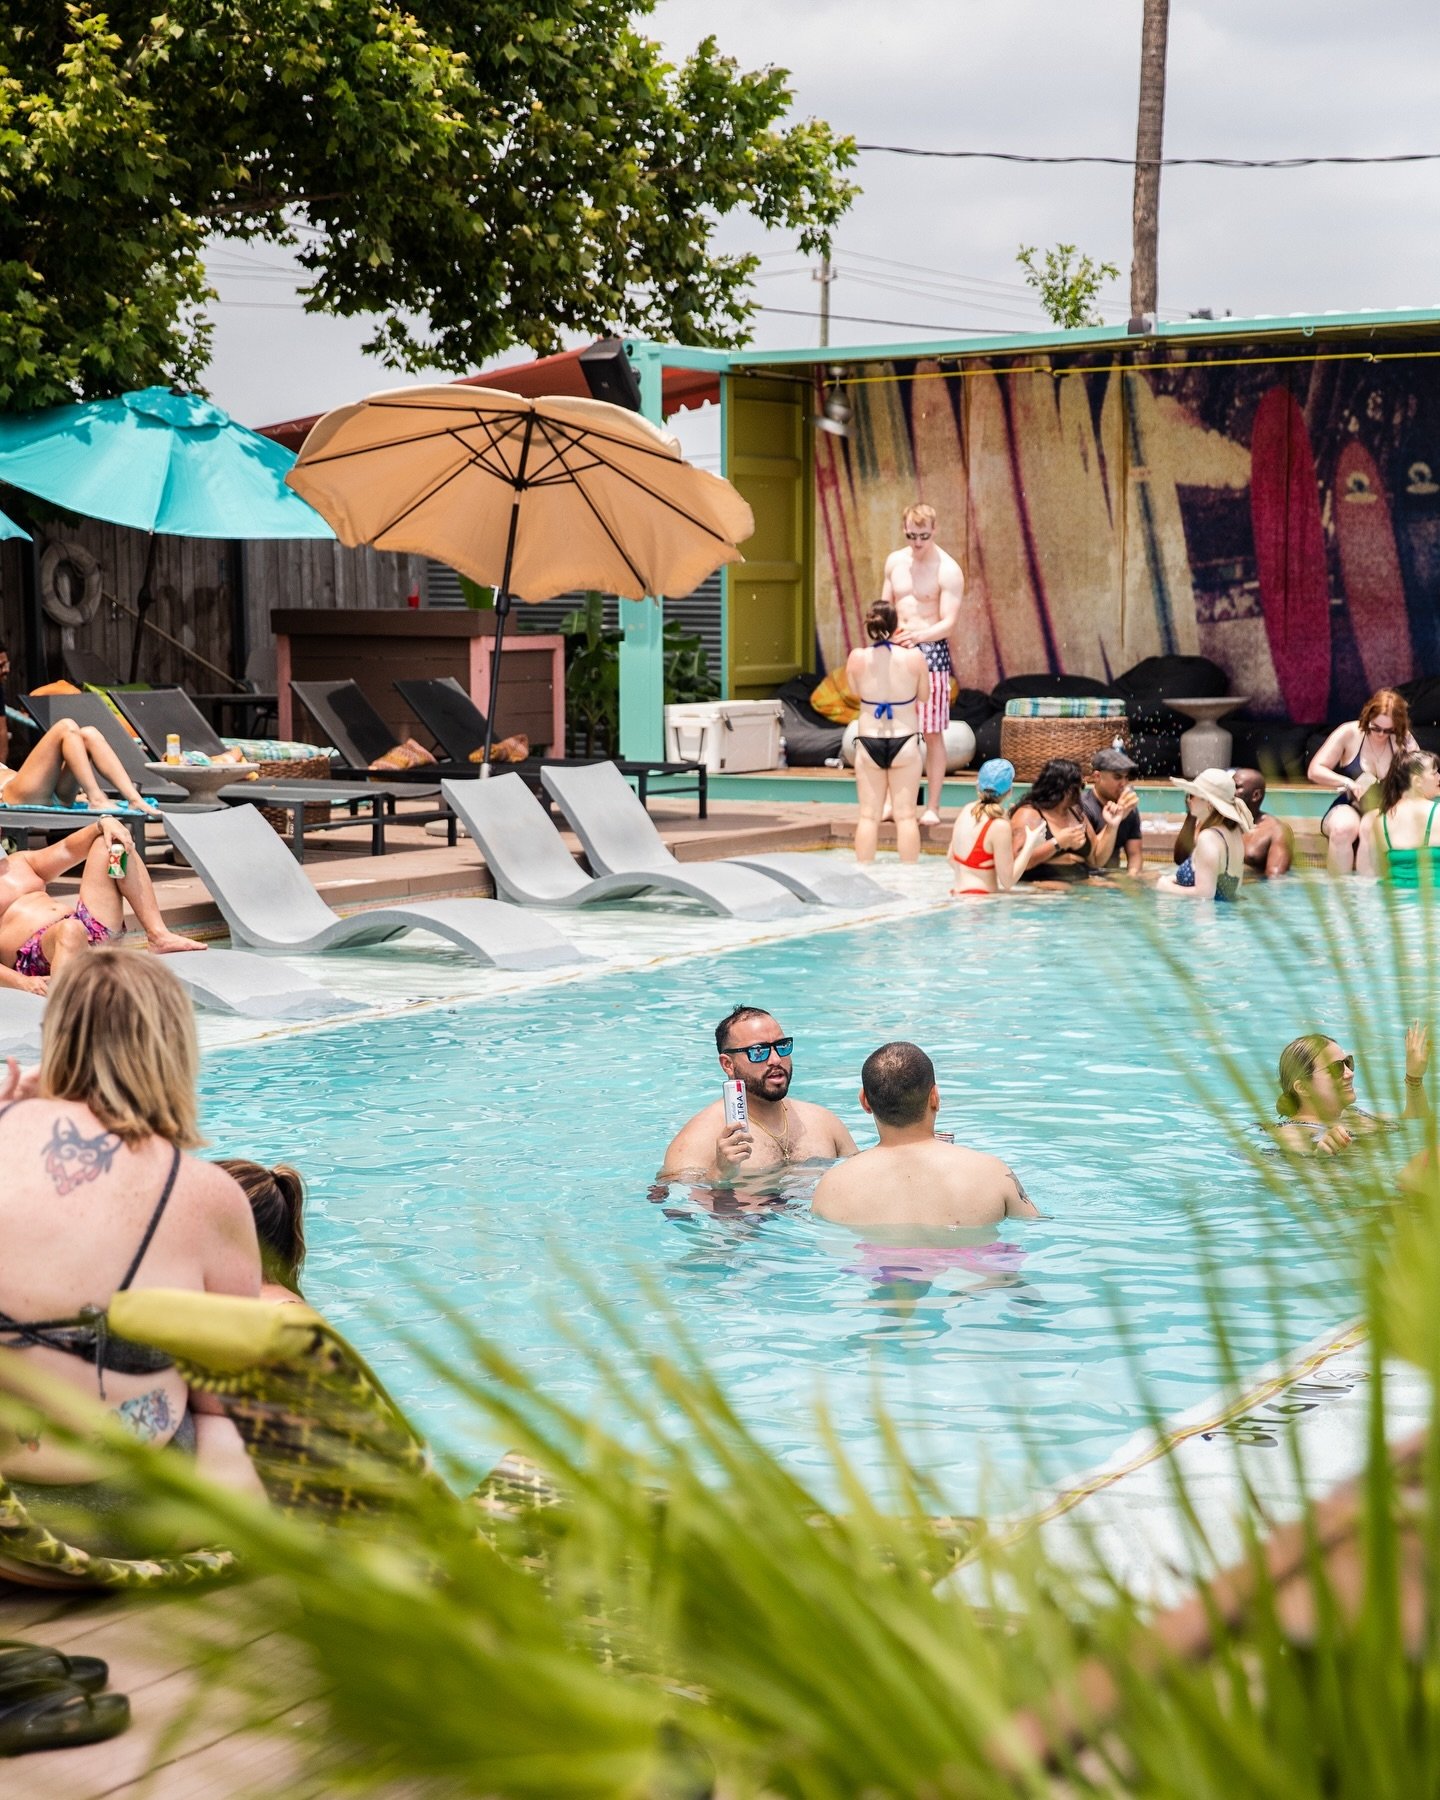 ✌🏽🌴Happy April, Friends! 🔥While the temps are warming up in #HTX, it&rsquo;s not quite pool weather yet. 🫣Stay tuned over the next few weeks as we will announce our official opening weekend date soon! #ESSC